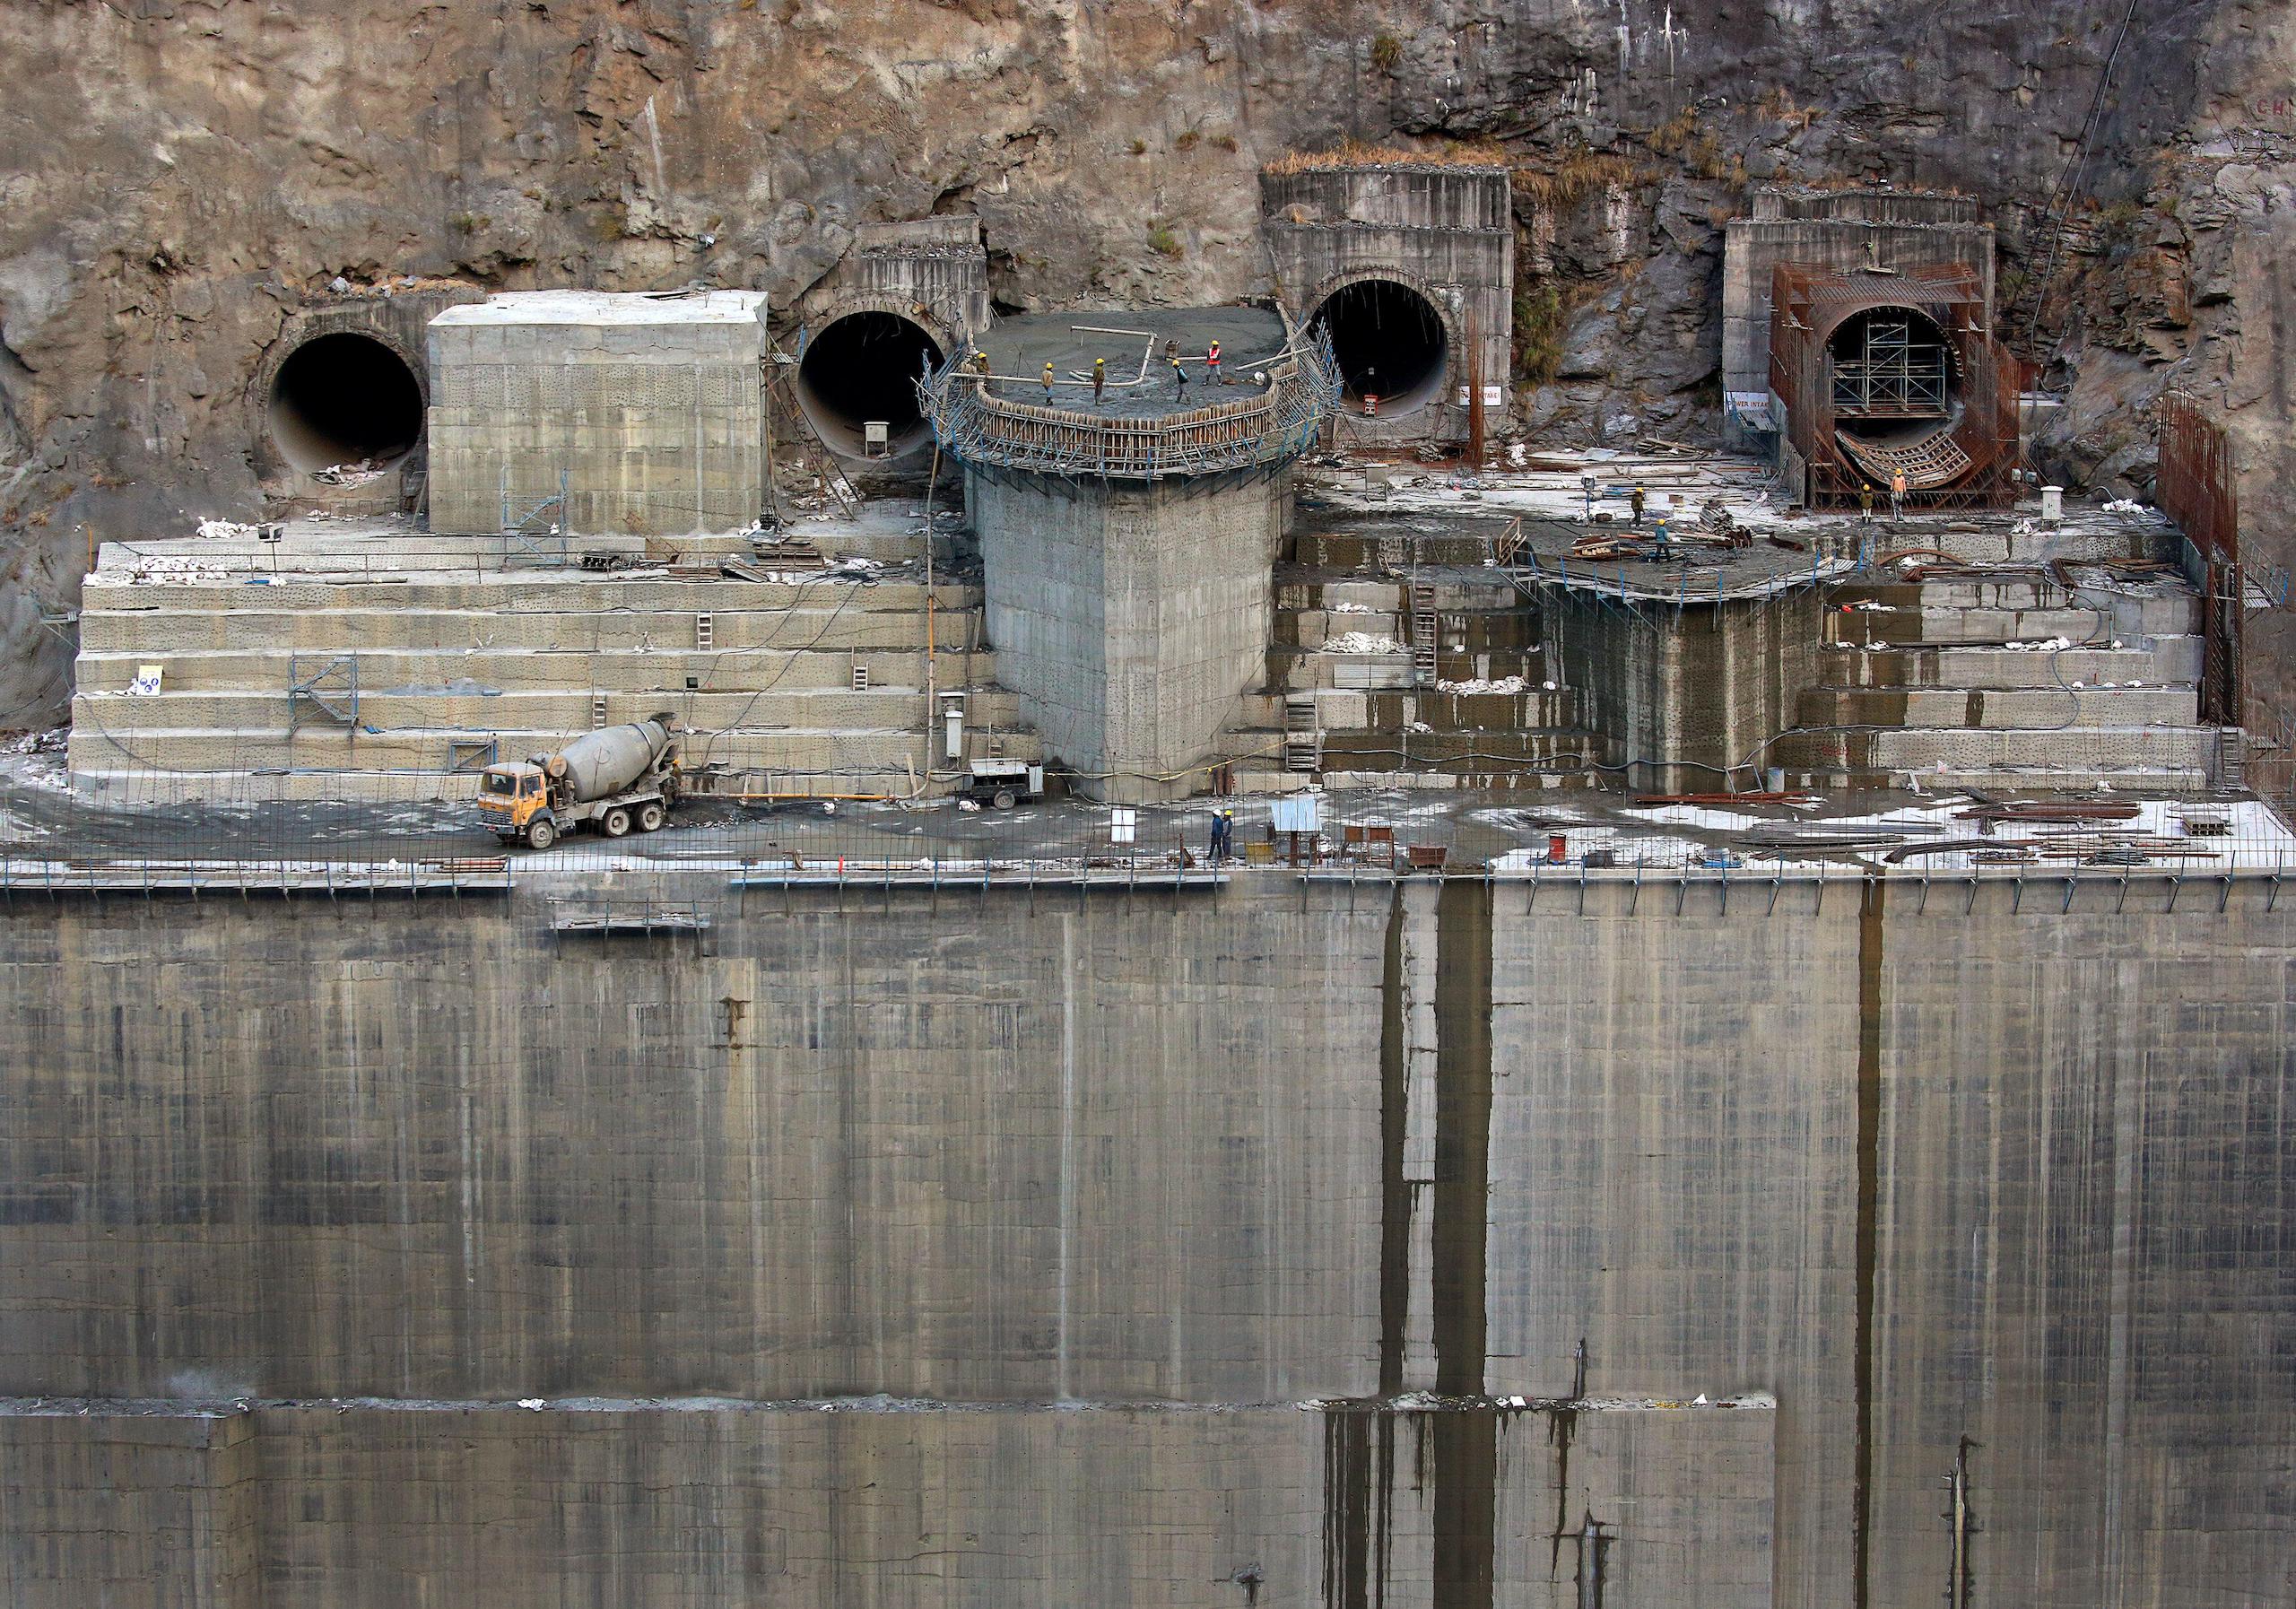 <p>Construction work in December 2017 on one of the Punatsangchhu hydroelectric power projects. The two plants, the largest to be built in Bhutan, were meant to be completed by 2020, but have been significantly delayed, costing more than a billion dollars. (Image: Hazel McAllister / Alamy)</p>